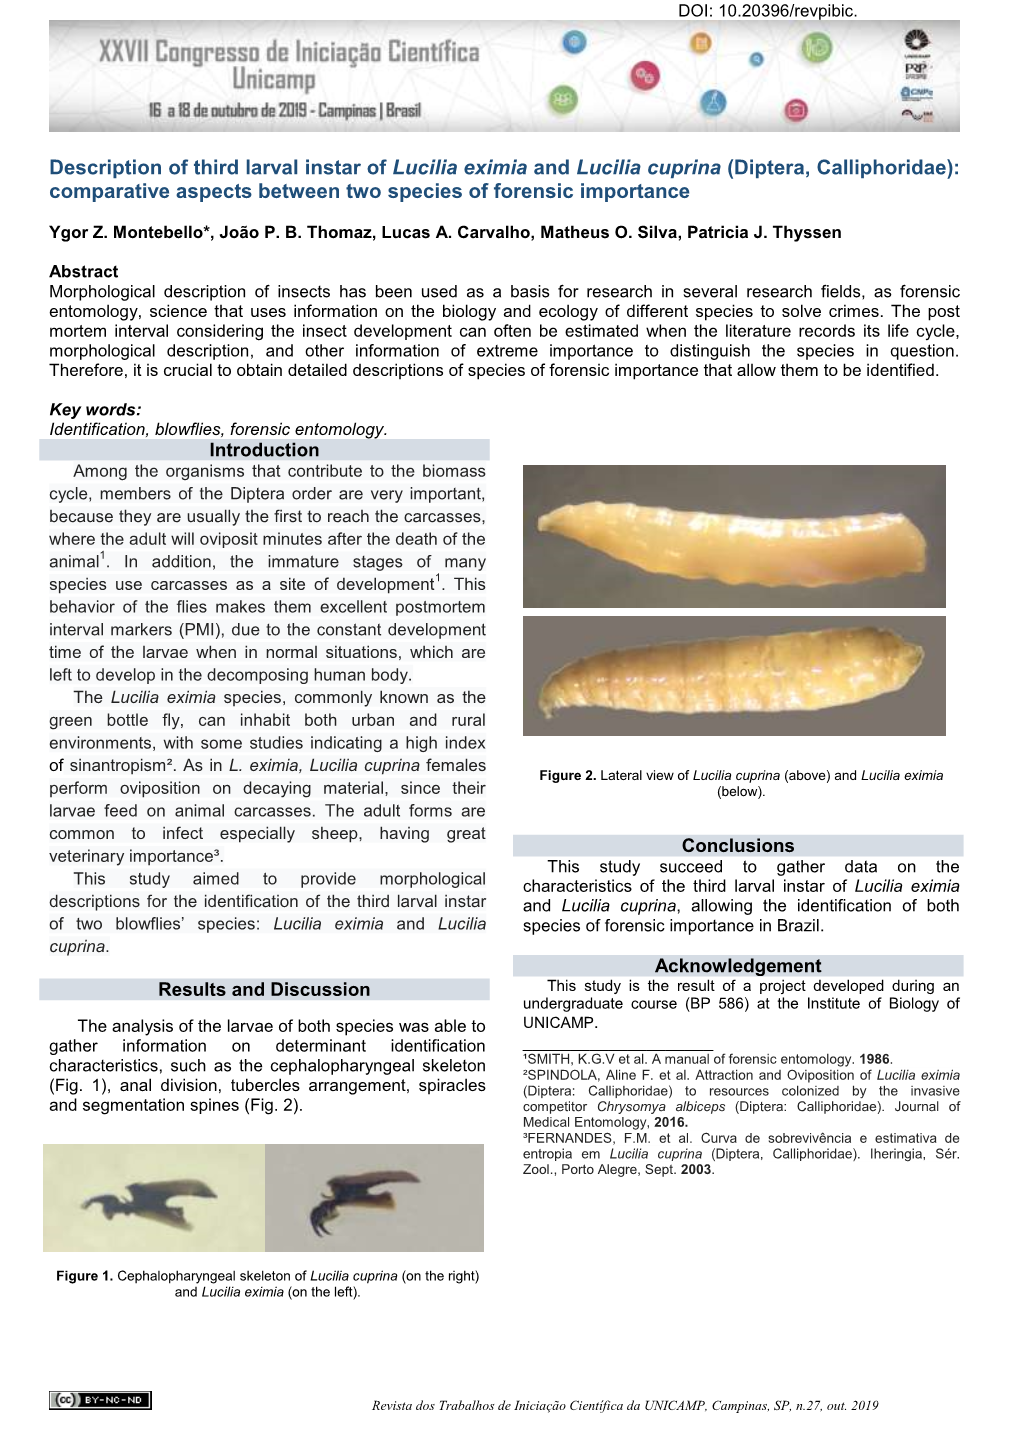 Description of Third Larval Instar of Lucilia Eximia and Lucilia Cuprina (Diptera, Calliphoridae): Comparative Aspects Between Two Species of Forensic Importance